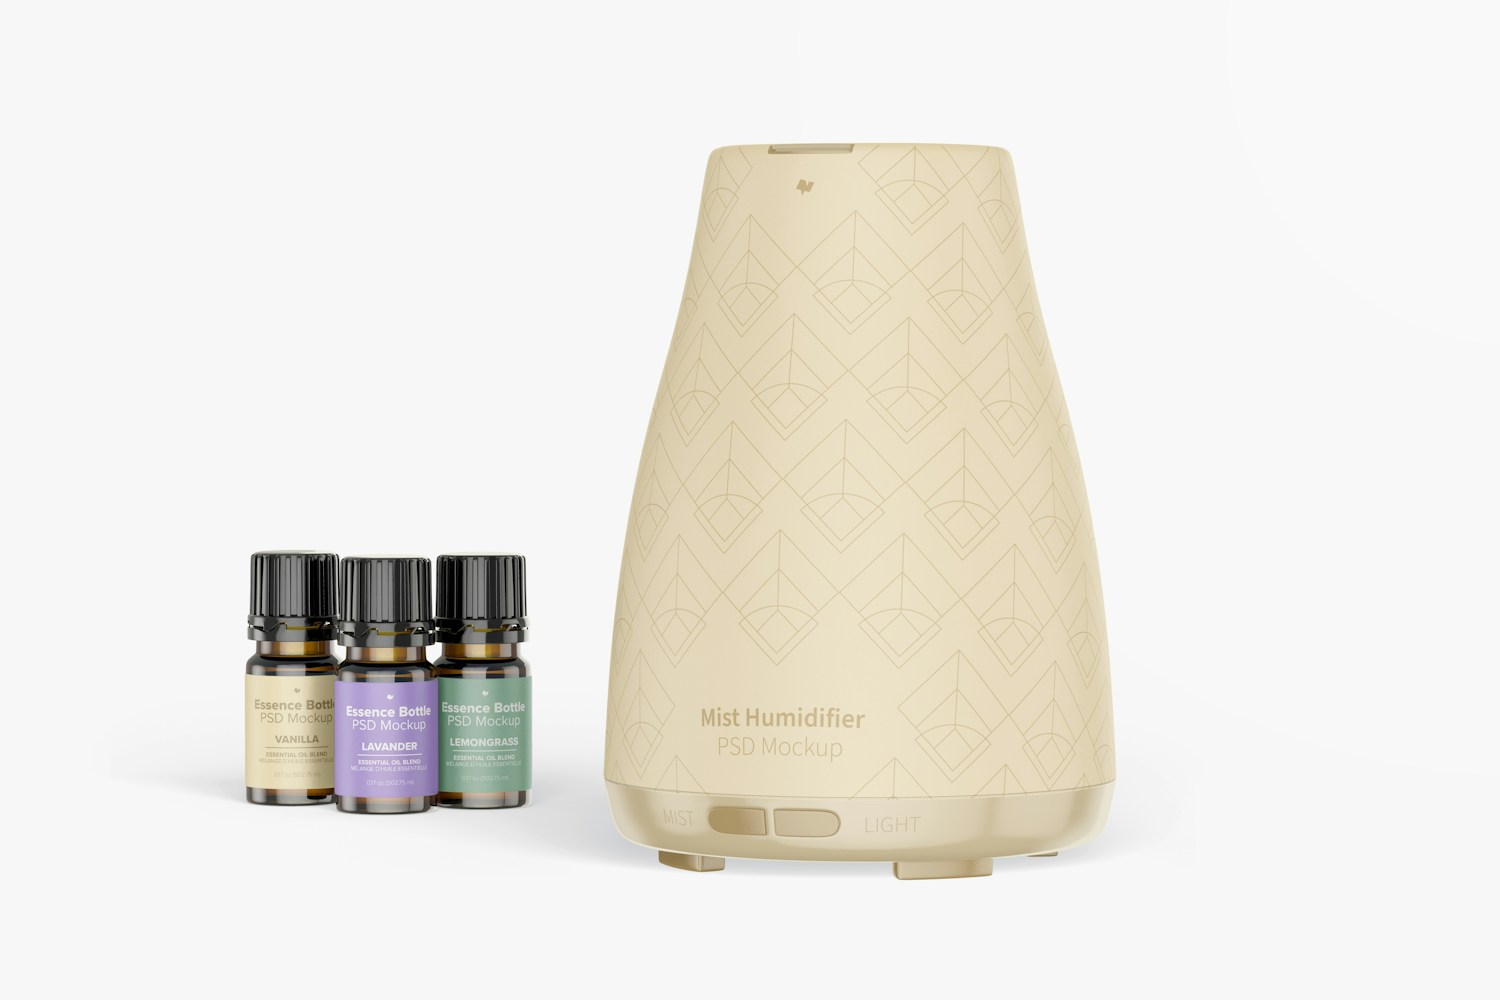 Mist Humidifier with Amber Bottle Mockup